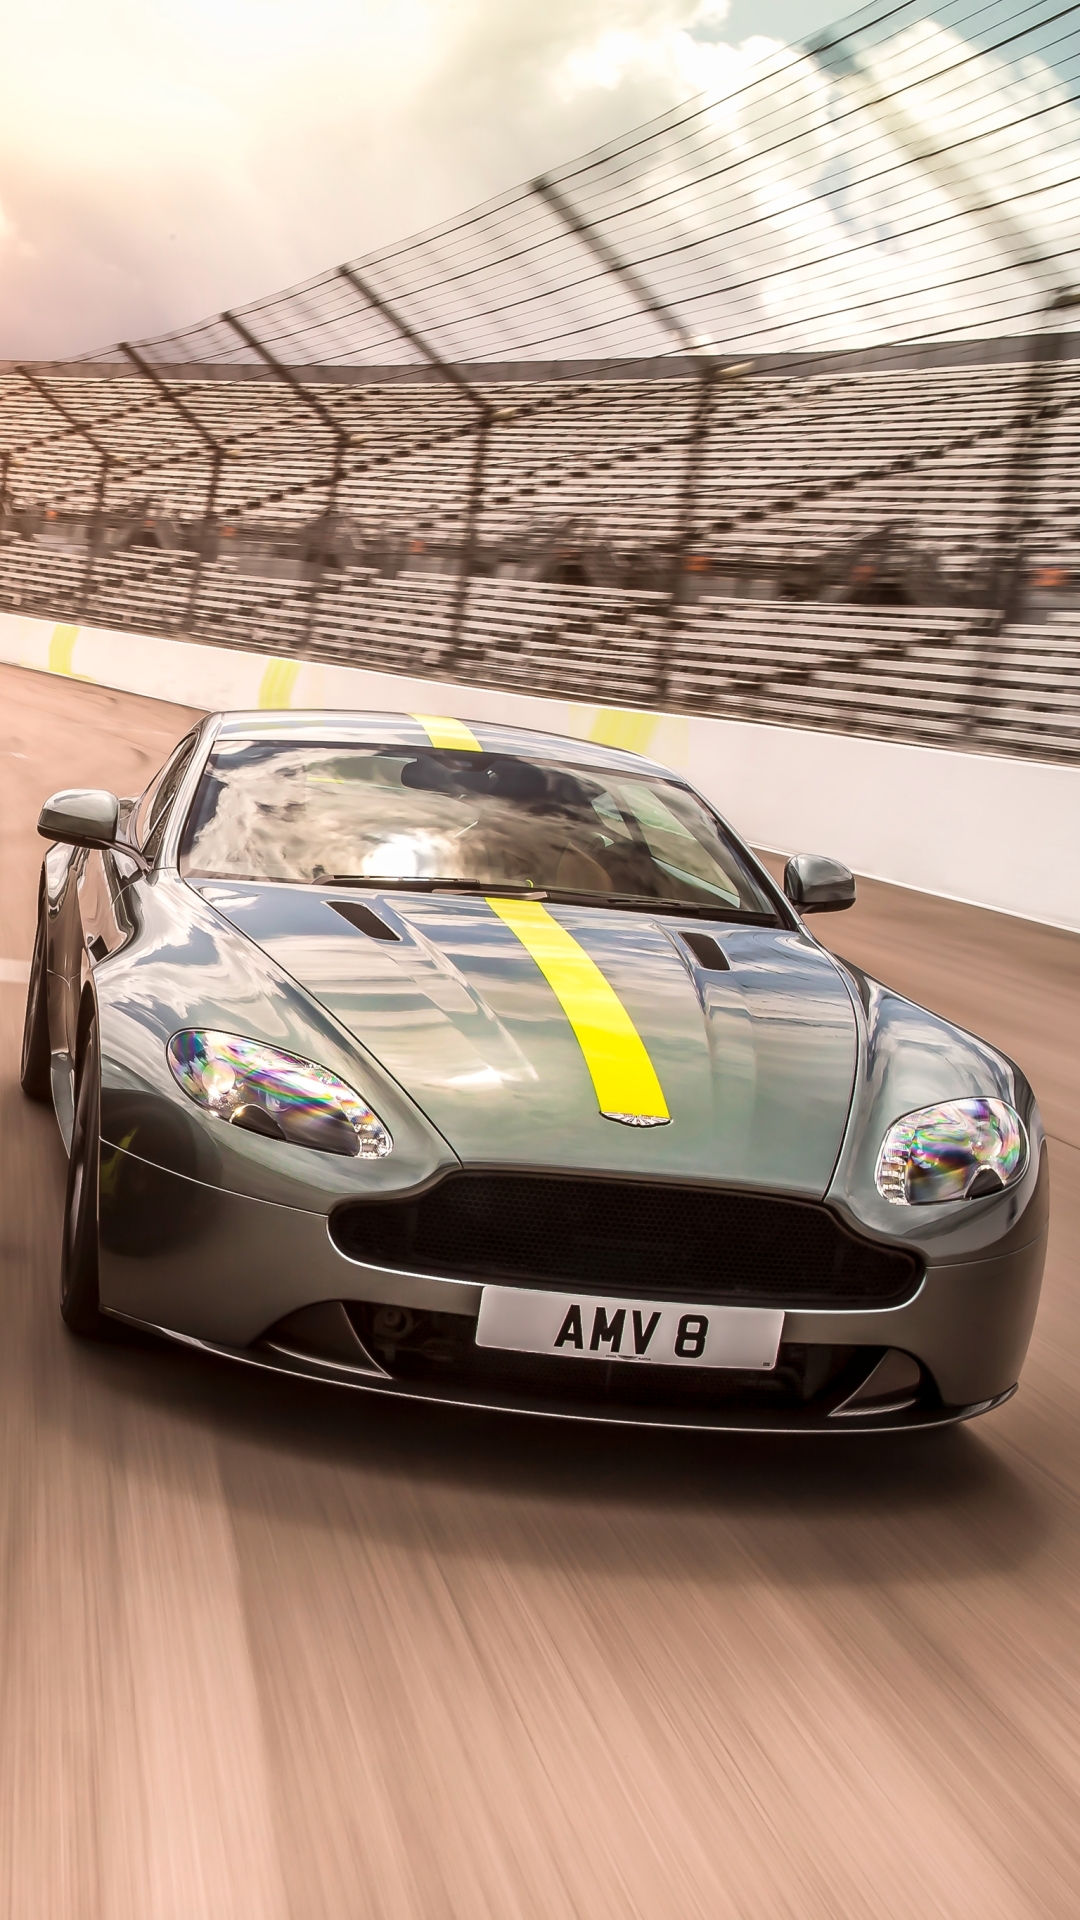  Aston Martin HQ Background Images